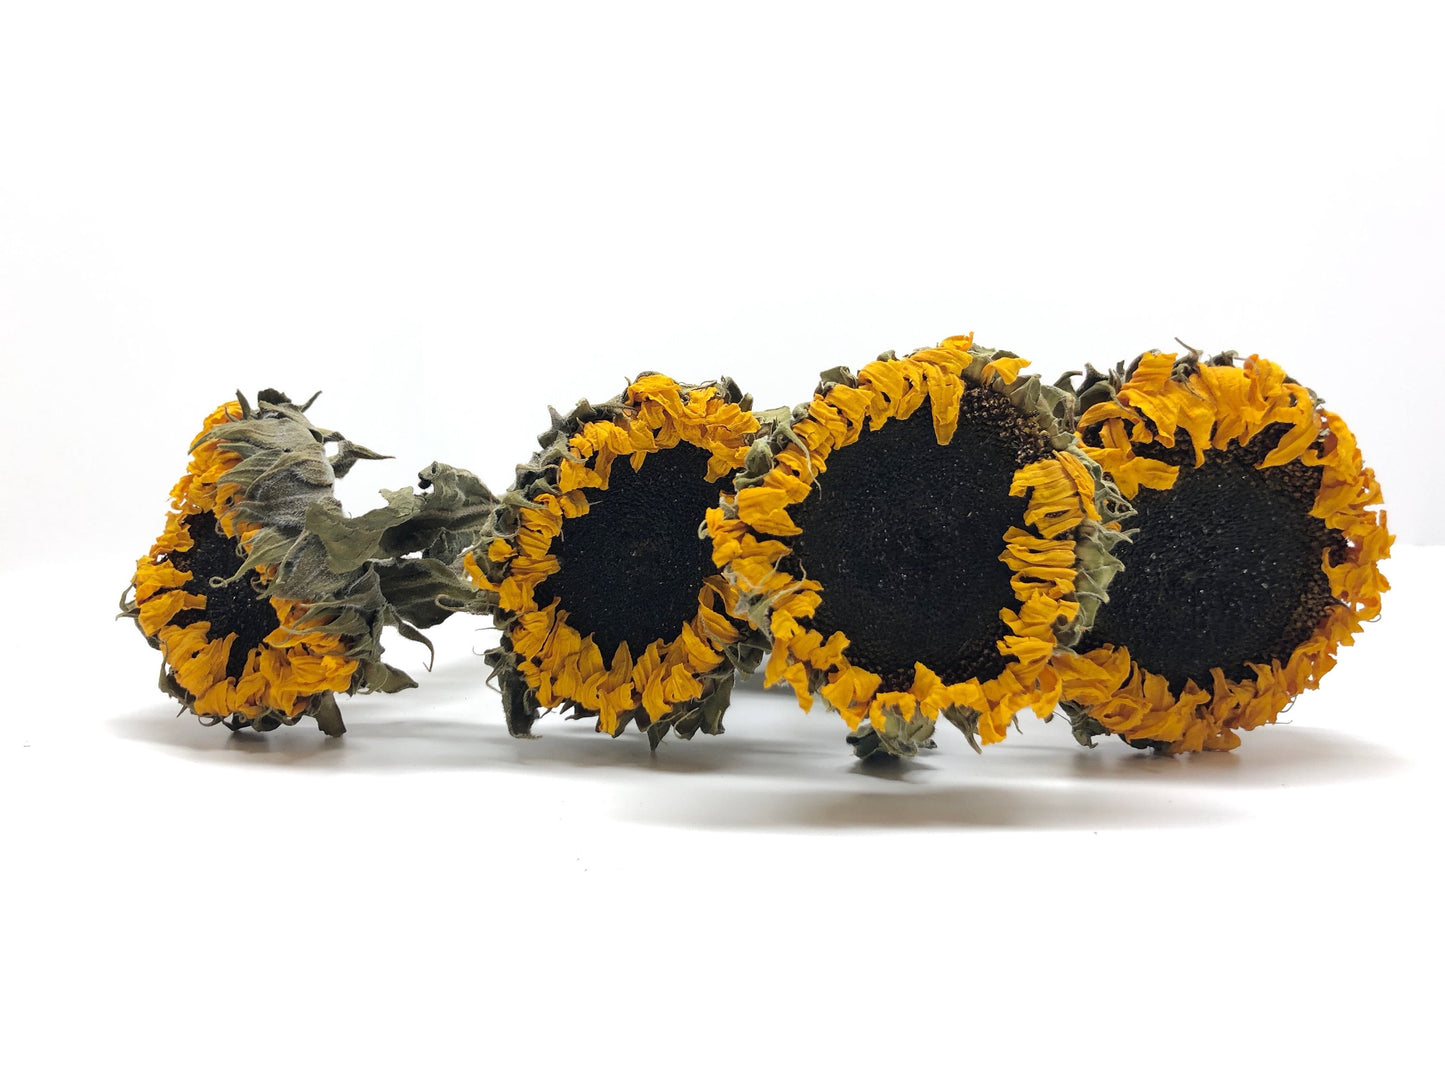 Dried Sunflowers, Sunflowers, Yellow, Orange, Summer Flowers, Preserved Flowers, Wedding Bouquet, Country, Dried Flowers, Rustic, Helianthus